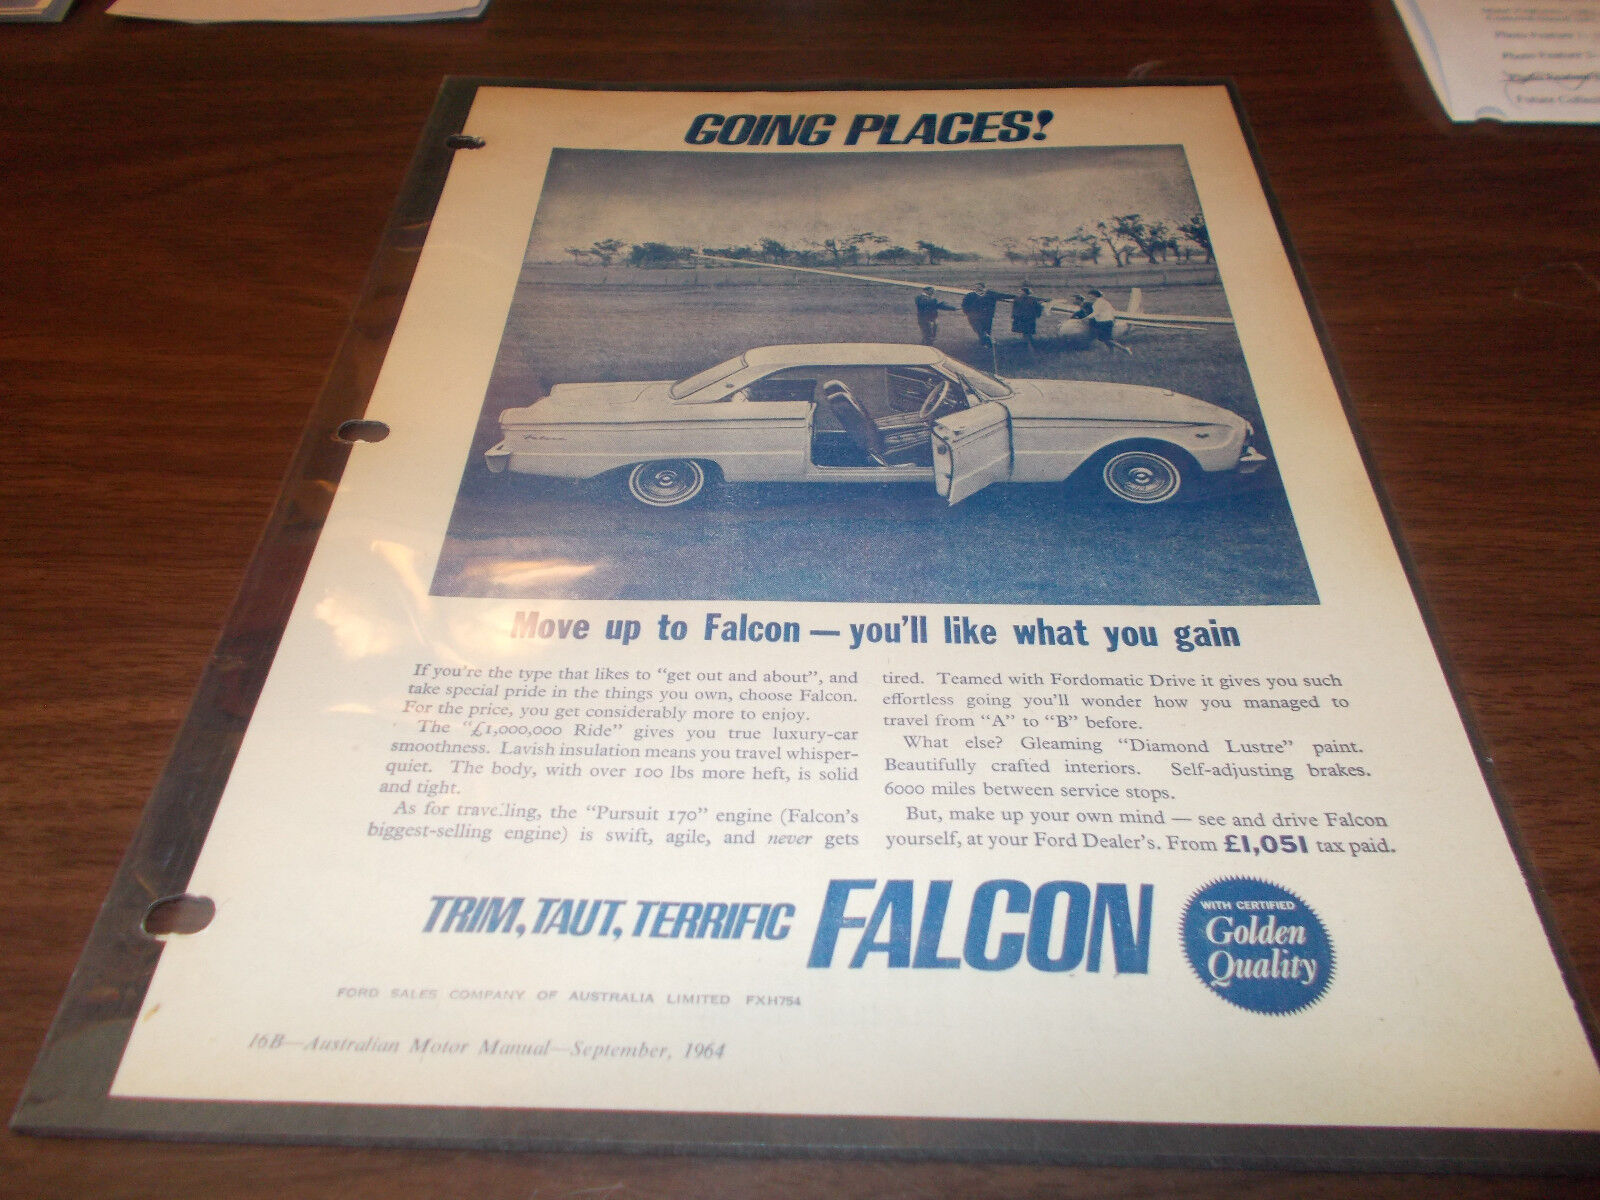 1963/64 Ford Falcon Australian Magazine ADs - 2 Different ADs for one Price